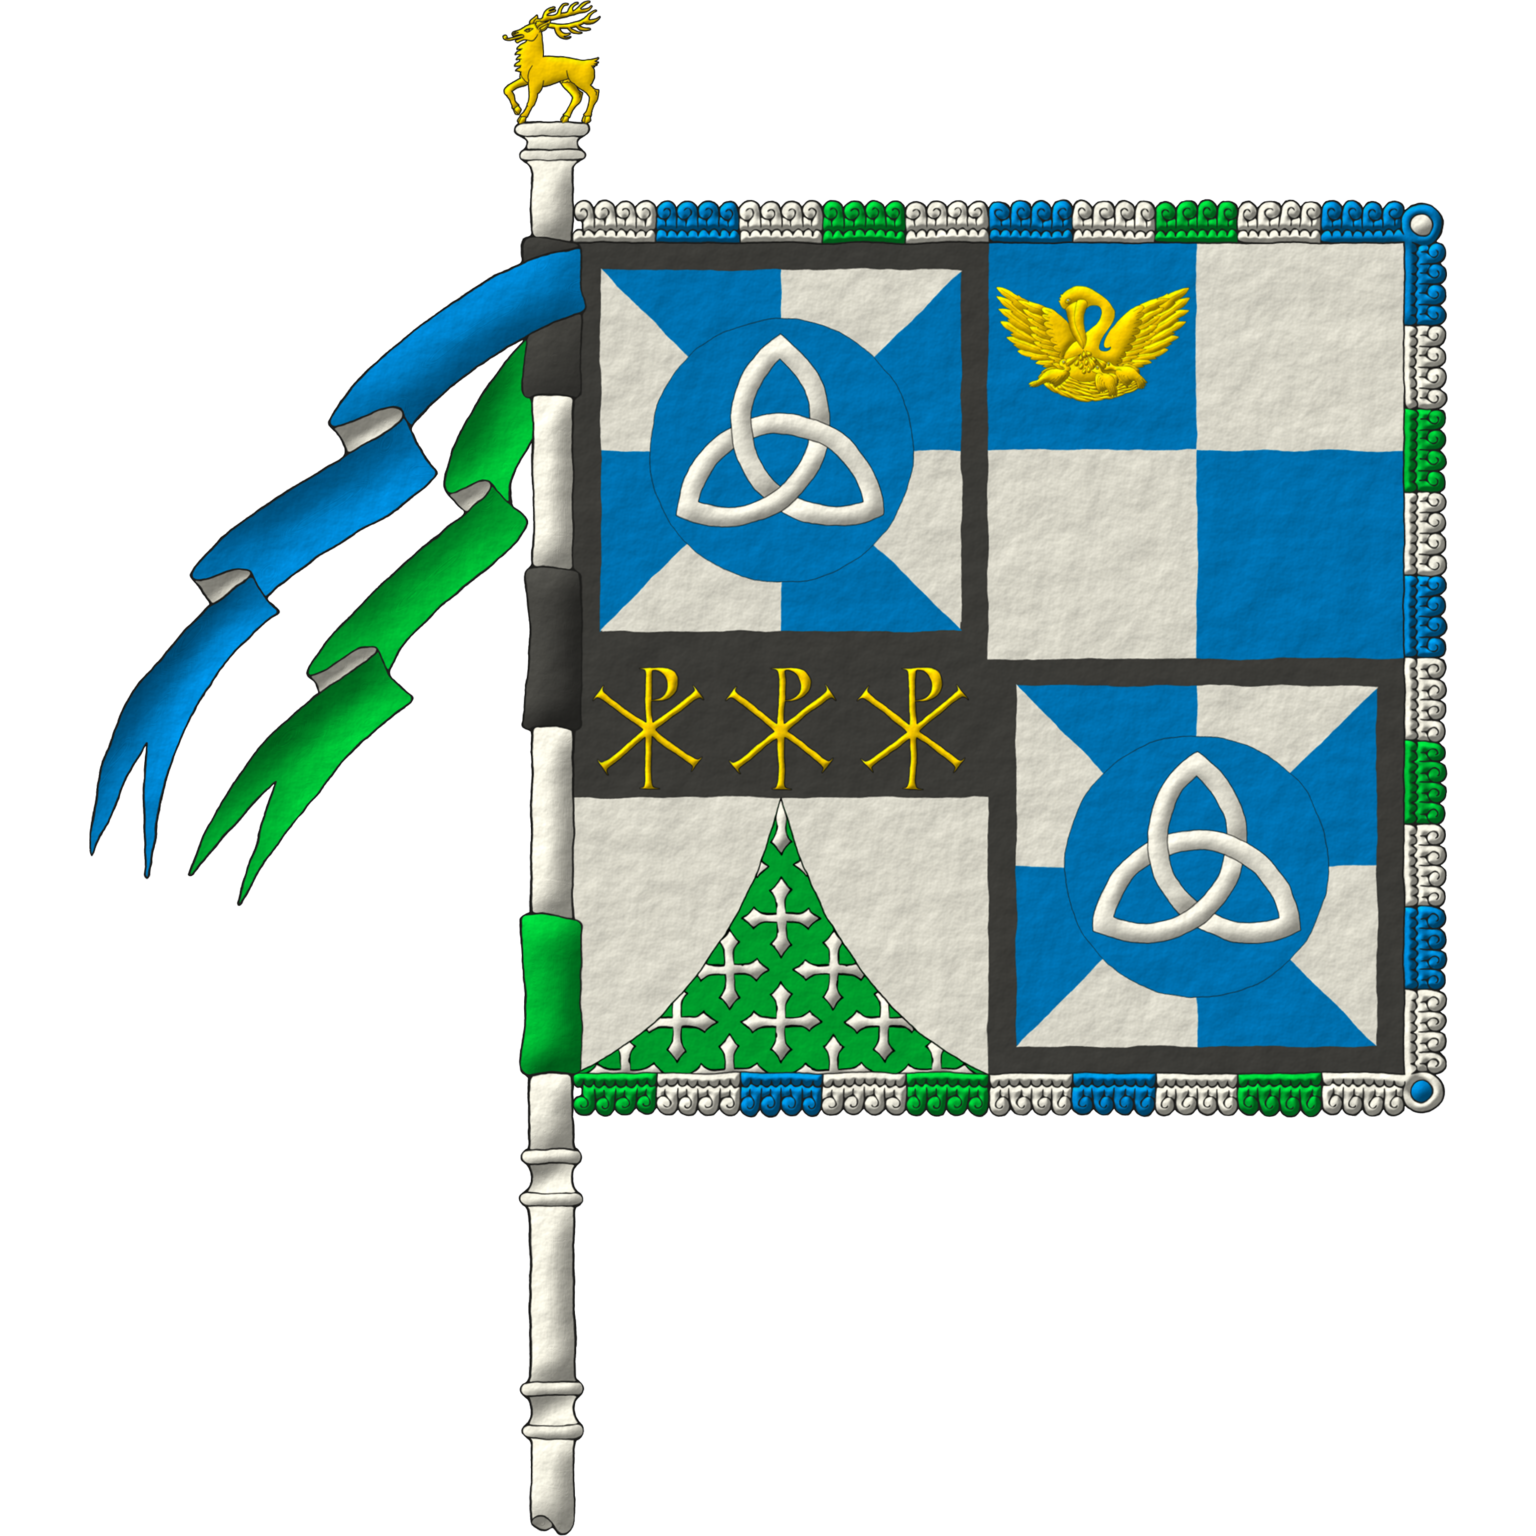 The banner of arms of Scott Harlan Severson designed by Kimberly Louise Severson and emblazoned by me. Blazon: Quarterly: 1 and 4 gyronny Azure and Argent, on a hurt, a triquetra Argent; a bordure Sable; 2, quarterly Azure and Argent, in the 1st quarter, a pelican in her piety Or; 3 Argent chapé ployé Vert semé of crosses clechy Argent, on a chief Sable, three Chi Rho symbols Or.